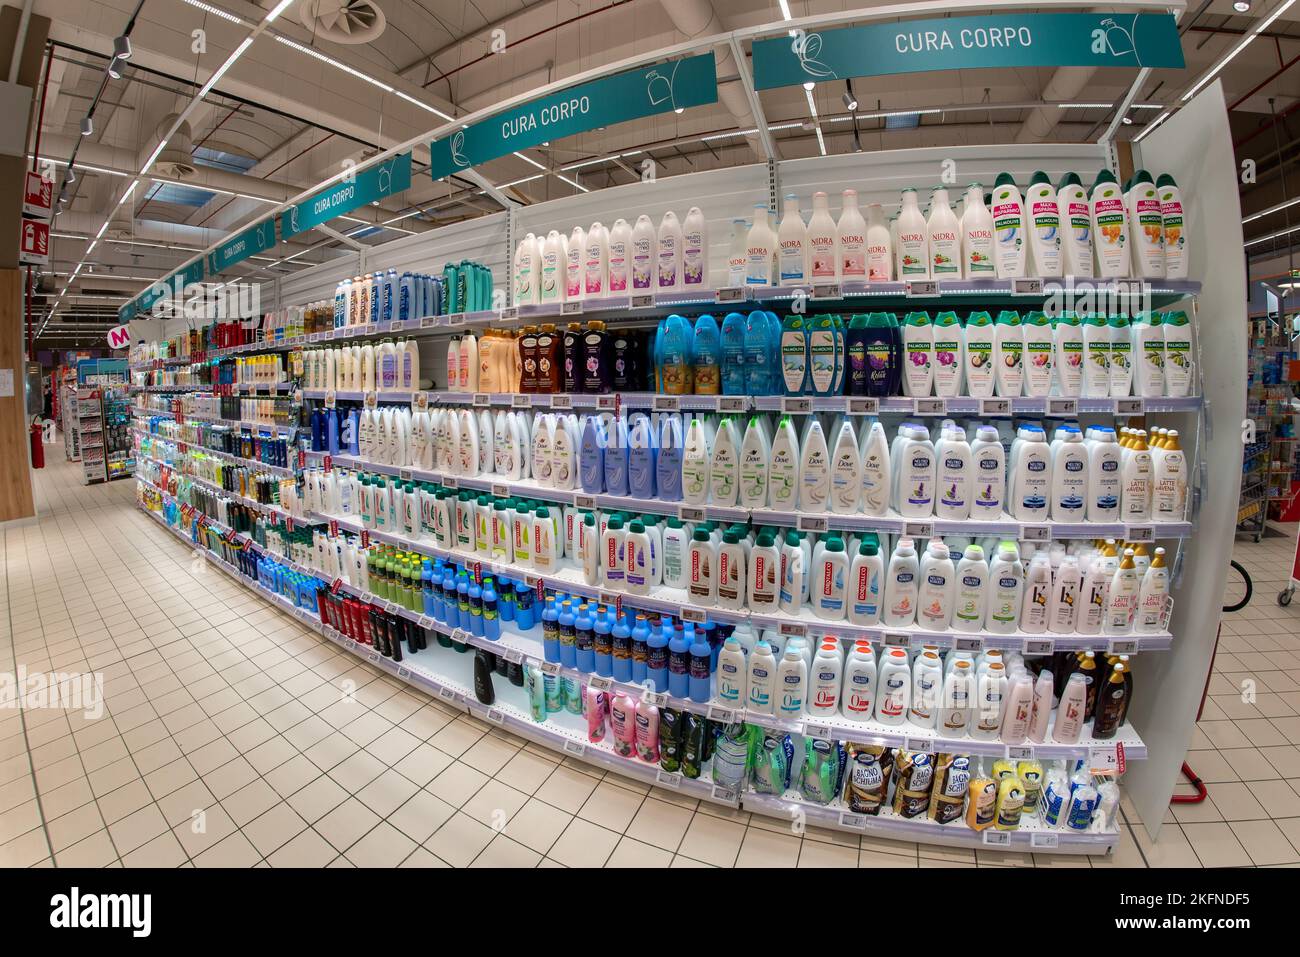 Cuneo, Italy - November 18, 2022: shelves with vast assortment of body care products, bubble baths and creams in Italian supermarket, fish eye vision Stock Photo